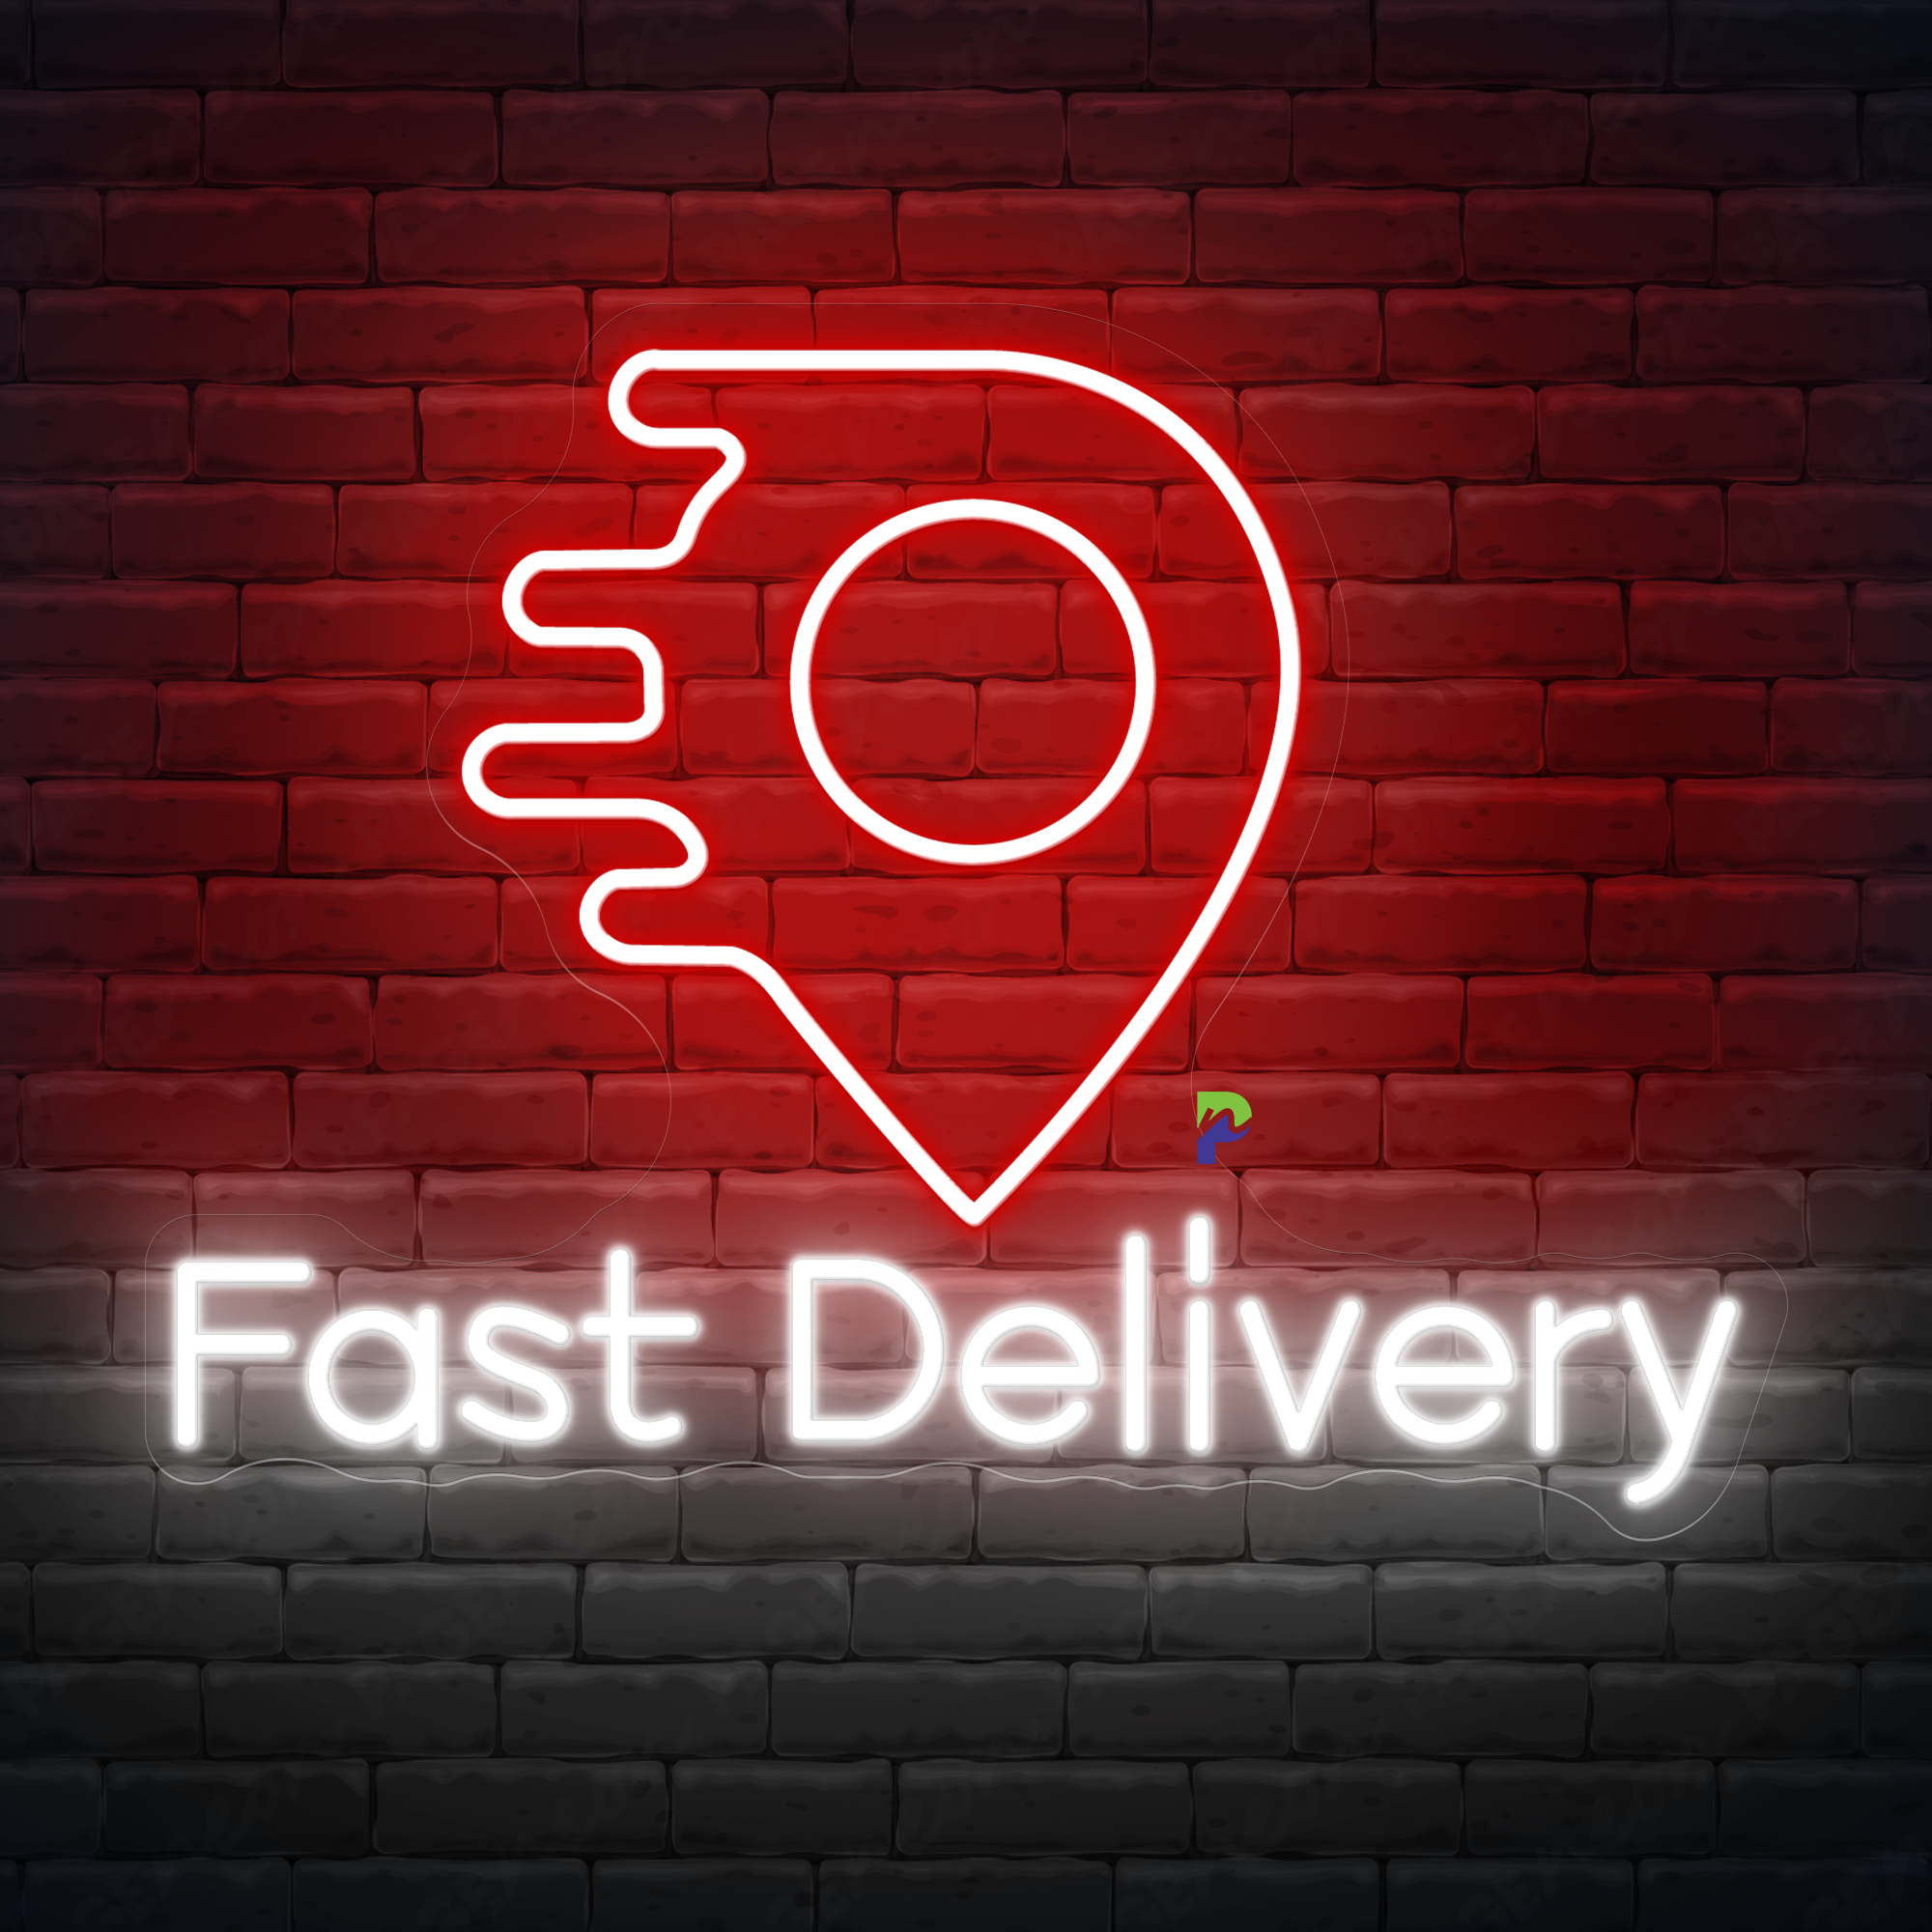 Fast Delivery Neon Signs Good Service Led Light